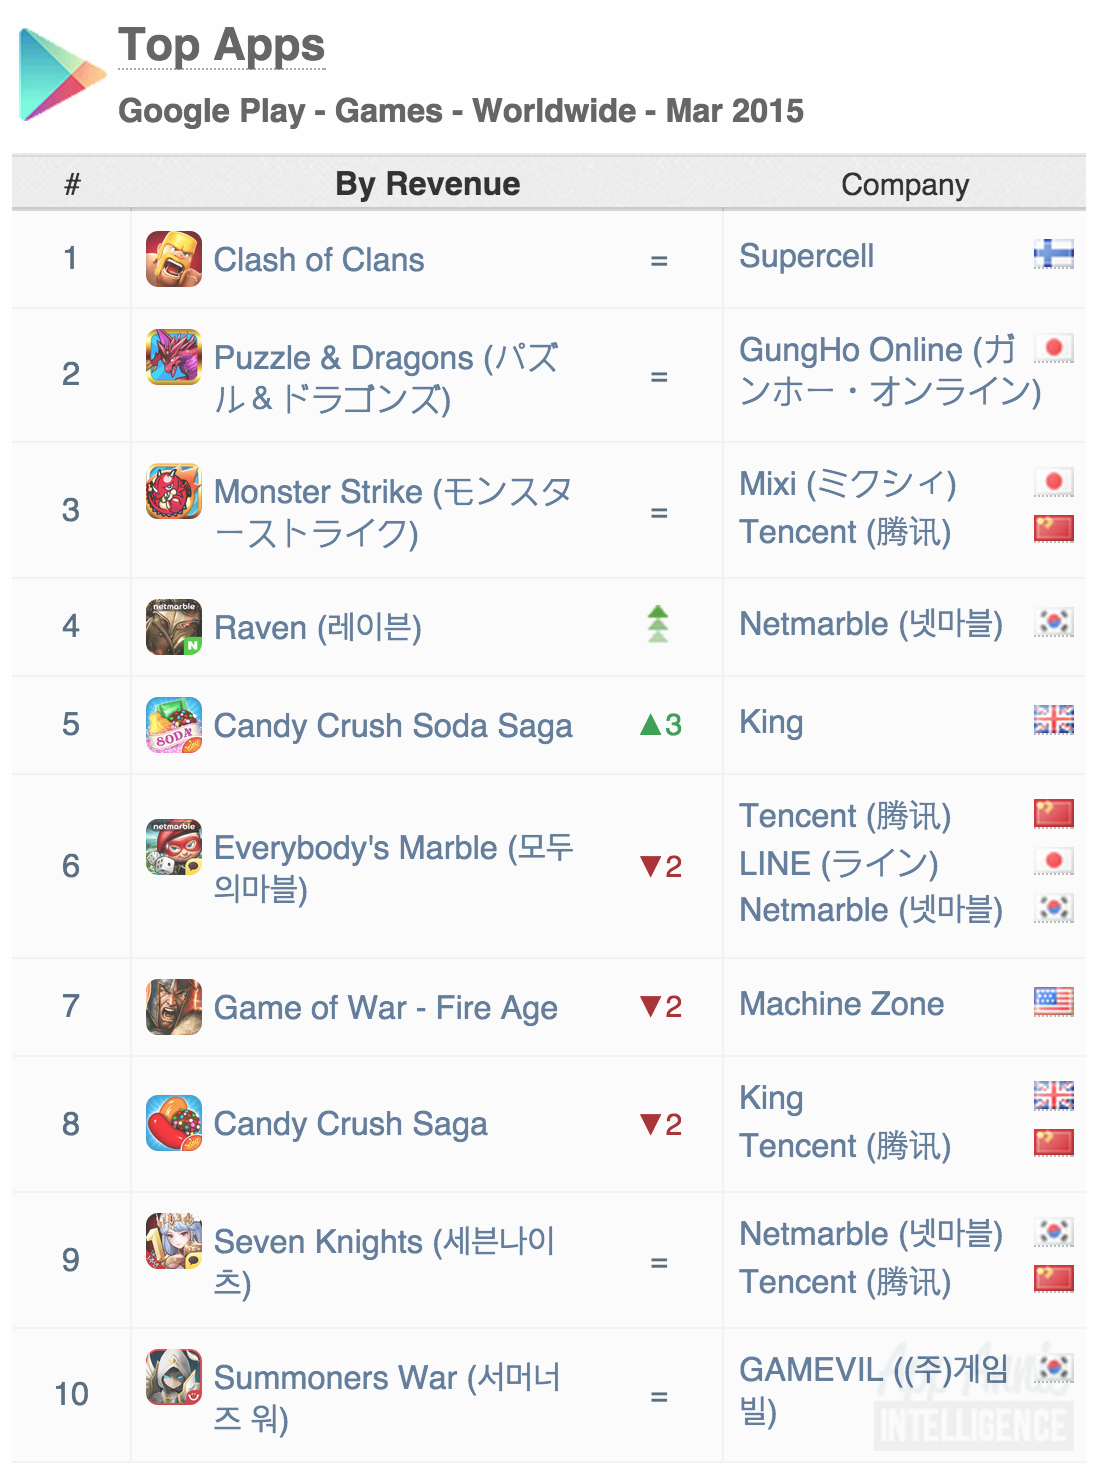 Top Apps Google Play Games Worldwide March 2015